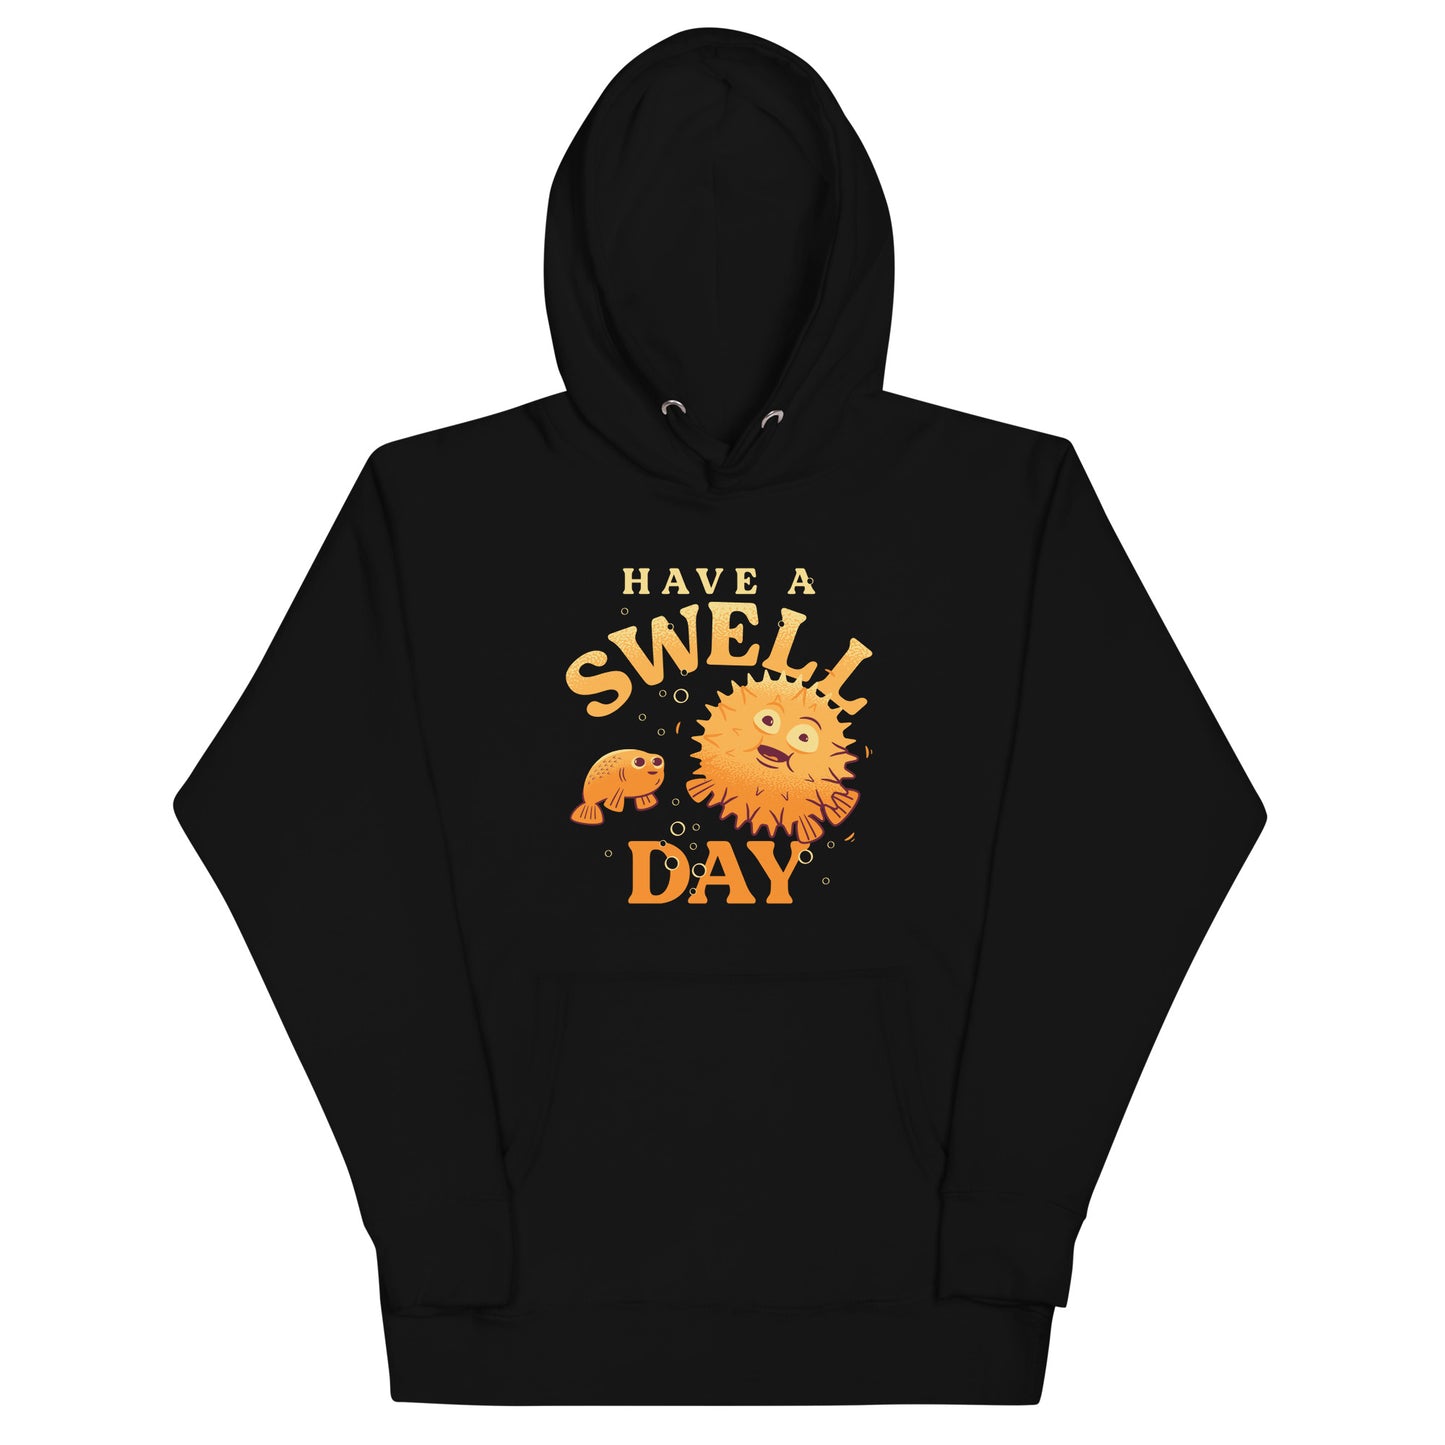 Have A Swell Day Unisex Hoodie